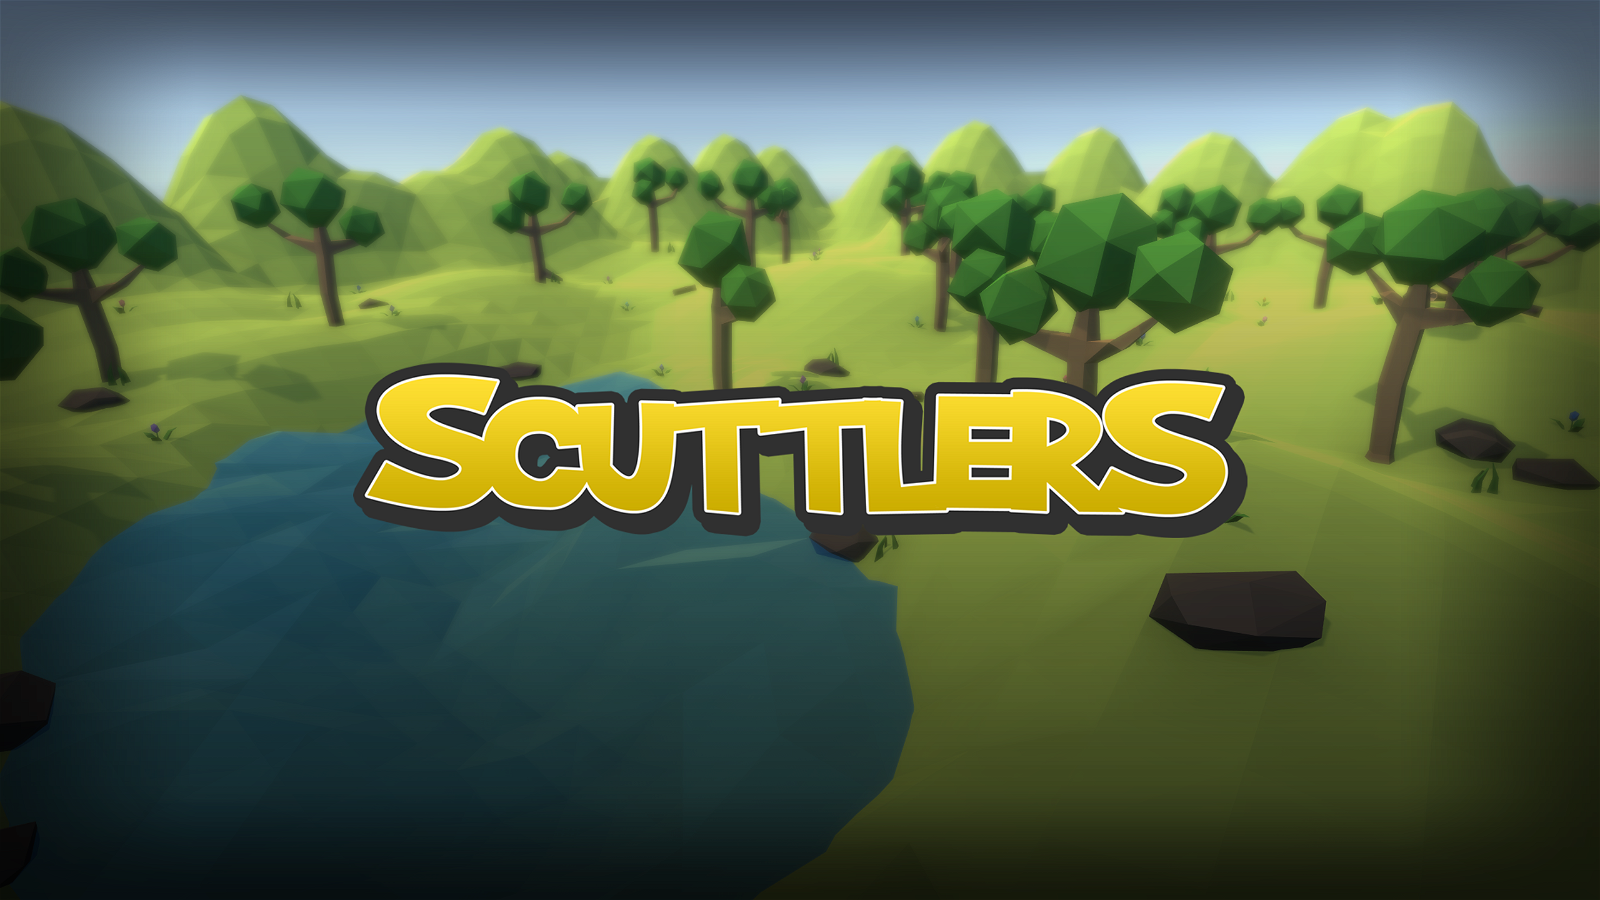 Image of Scuttlers